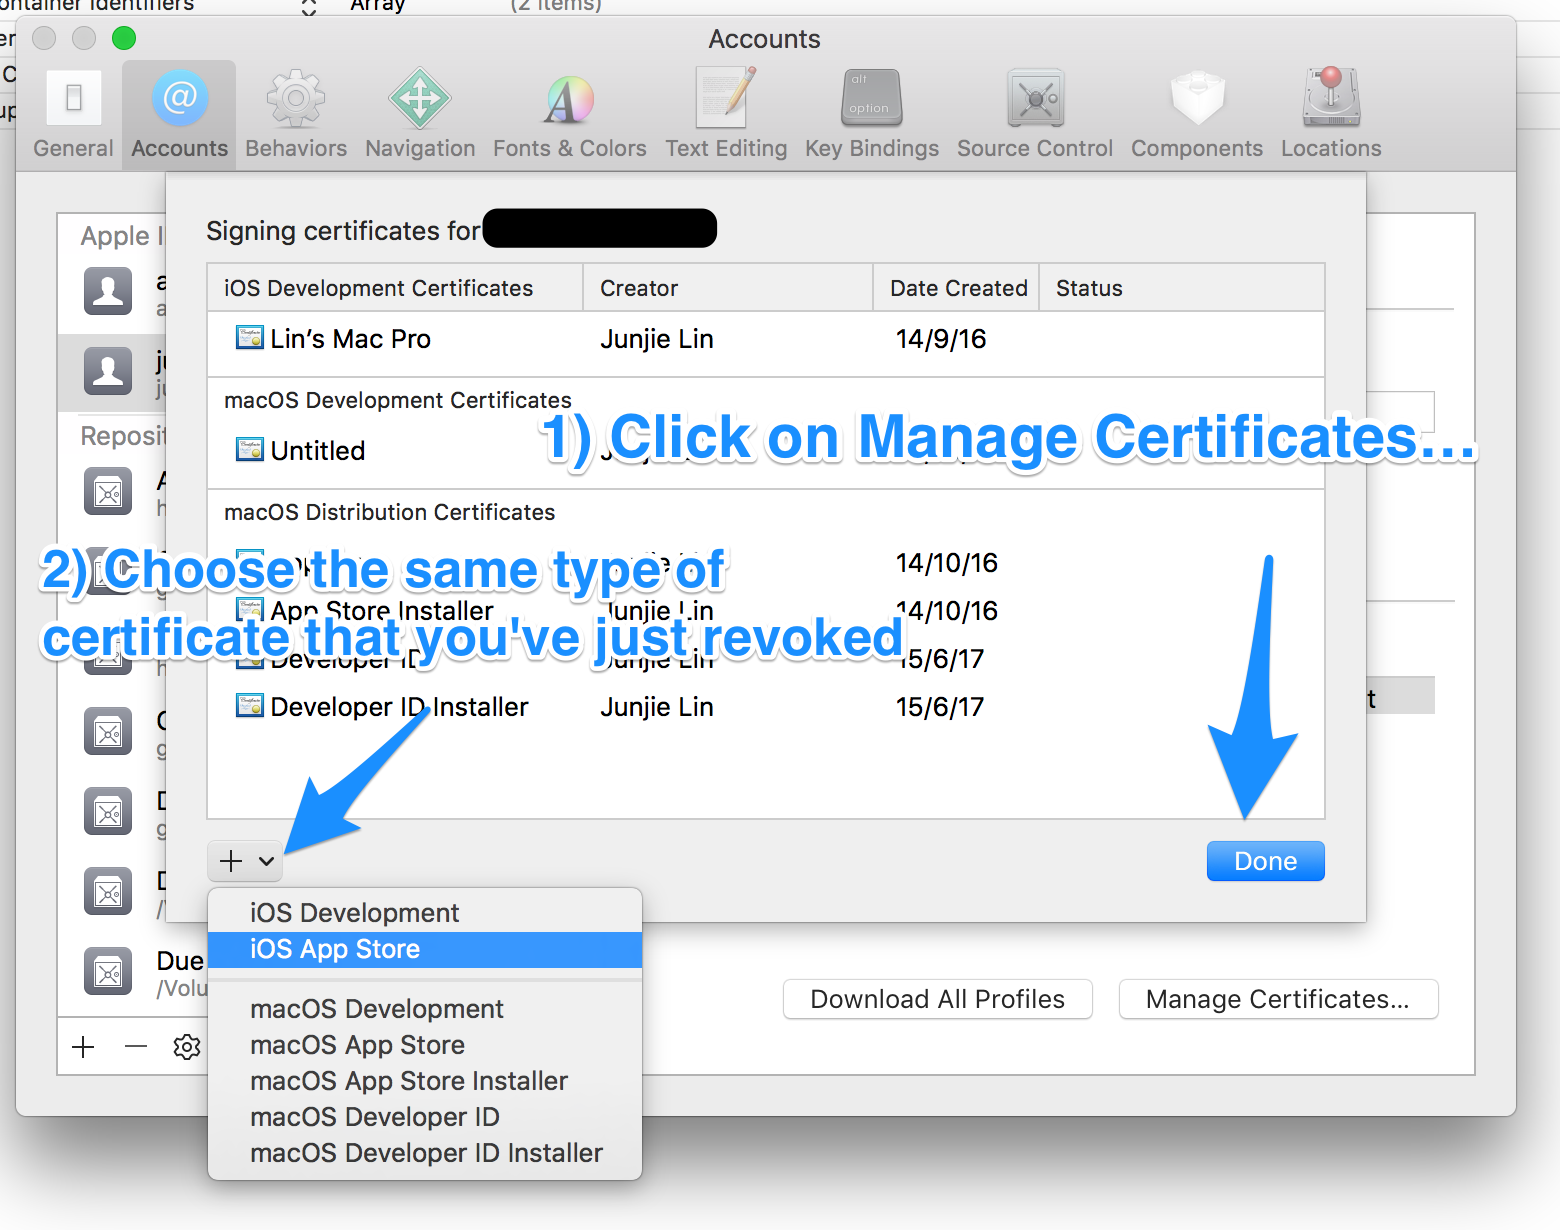 Let Xcode request a new certificate for you in Xcode > Preferences > Accounts > Apple ID > Manage Certificates…